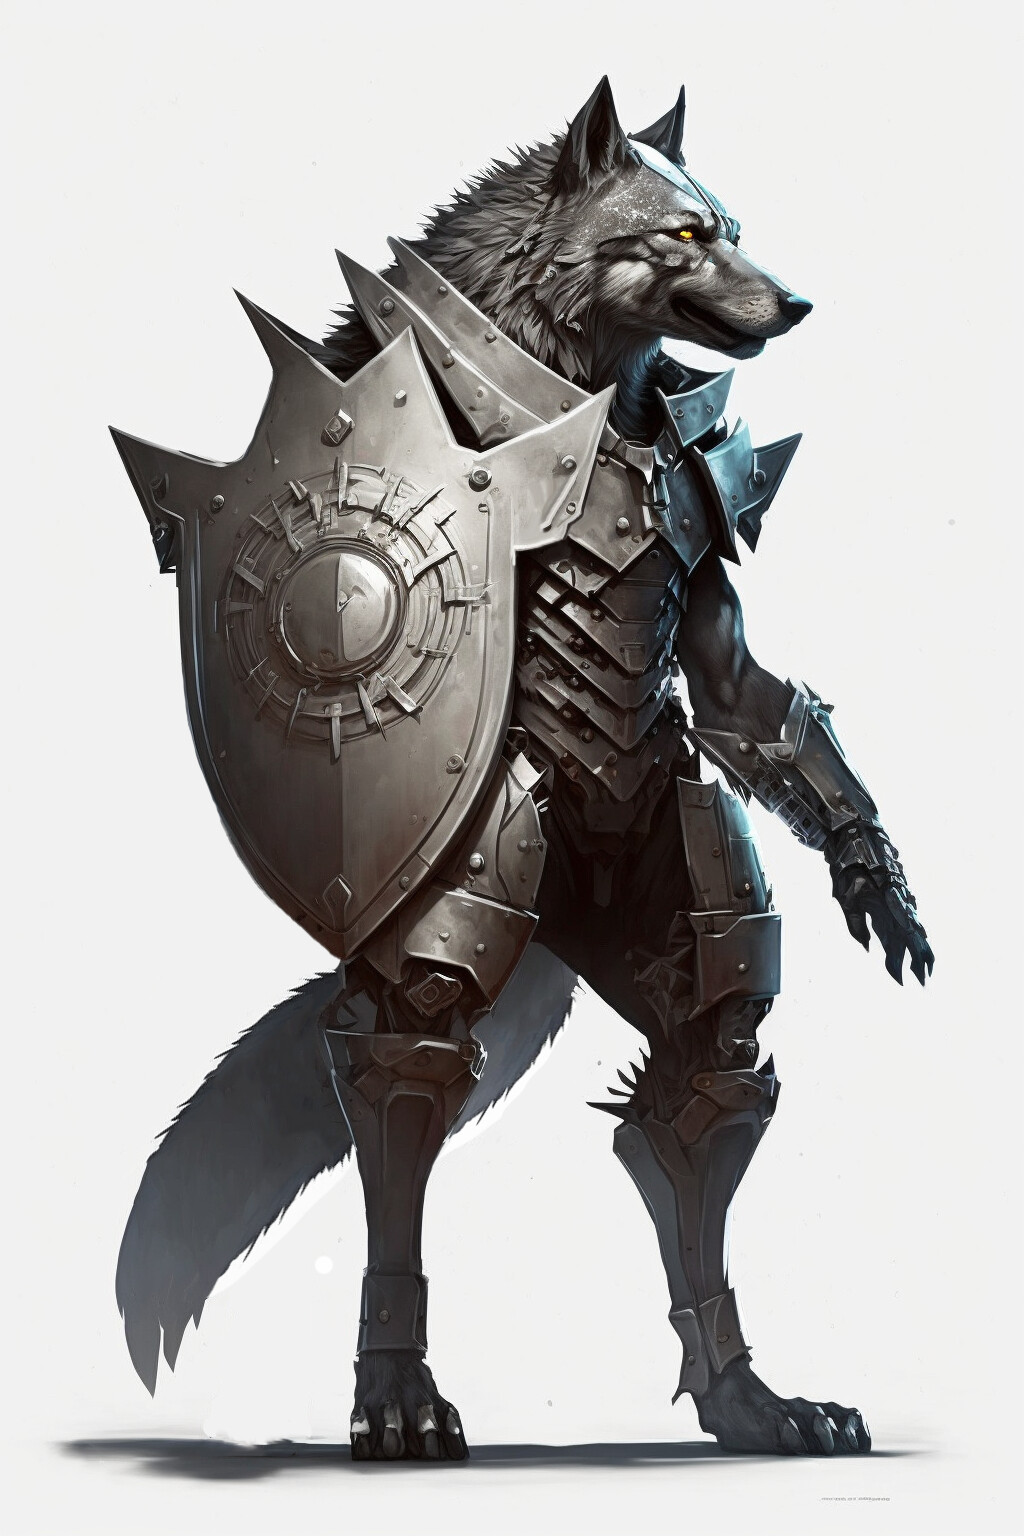 wolf characters